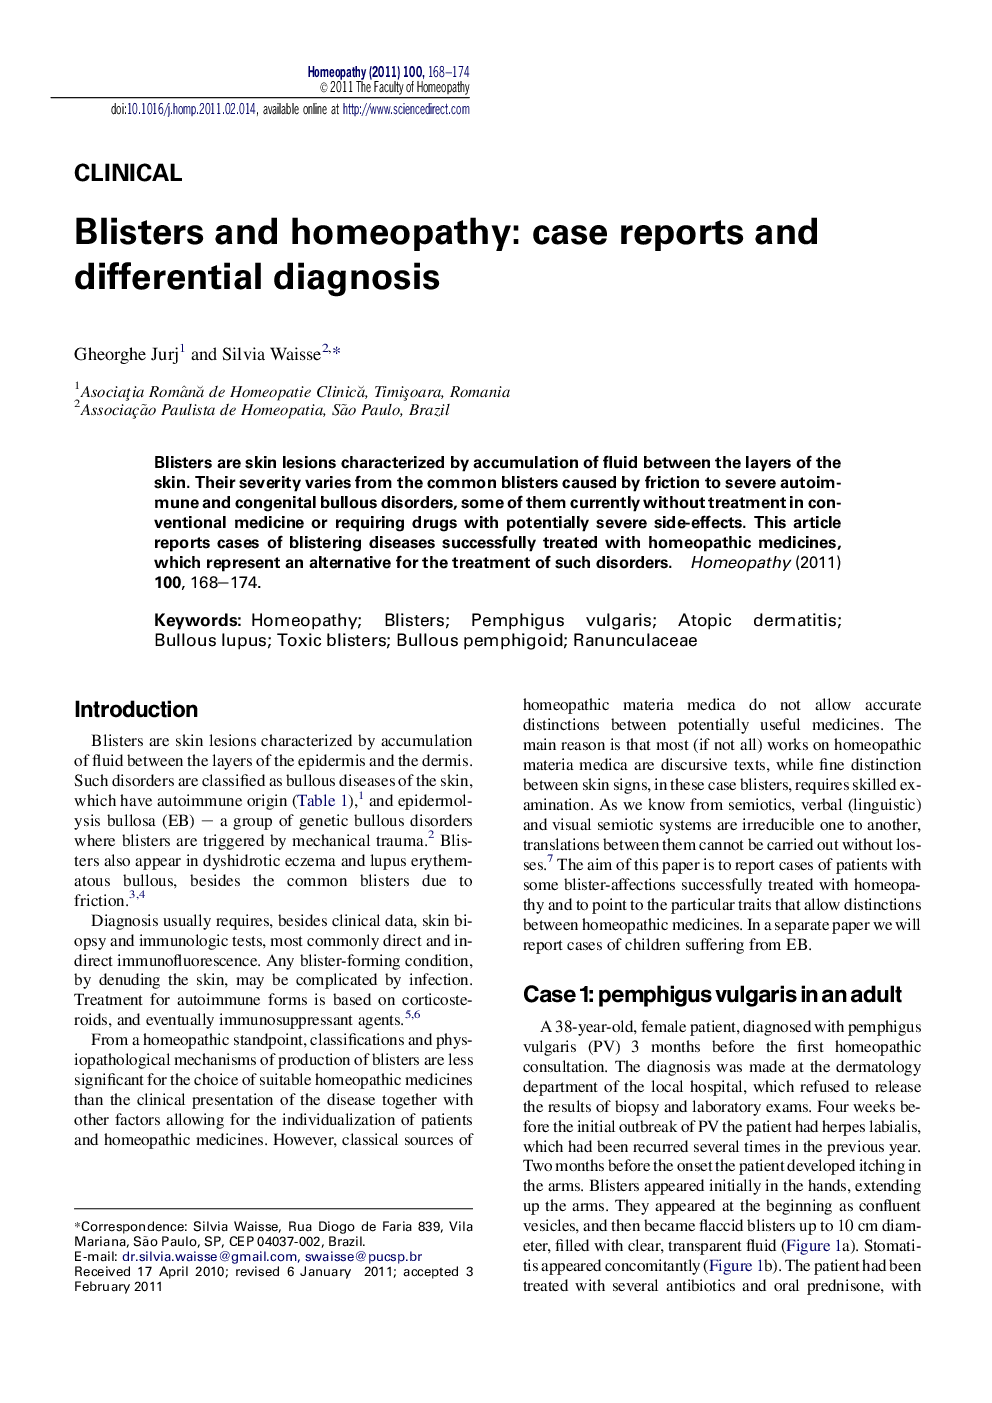 Blisters and homeopathy: case reports and differential diagnosis